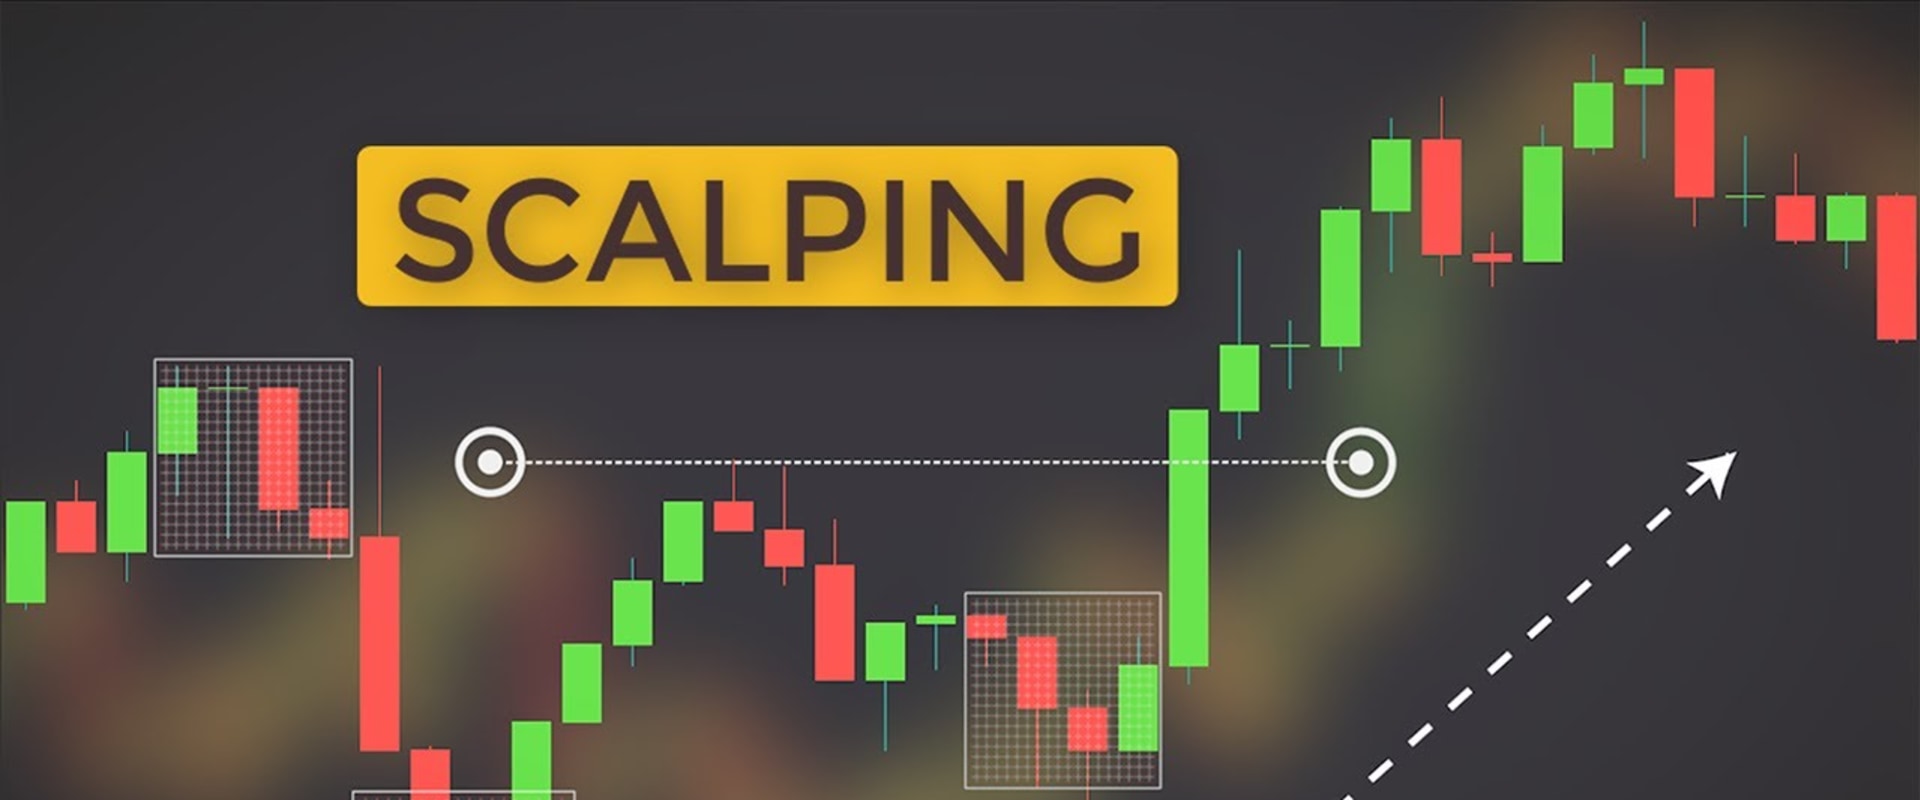 What are some strategies for scalping stocks?